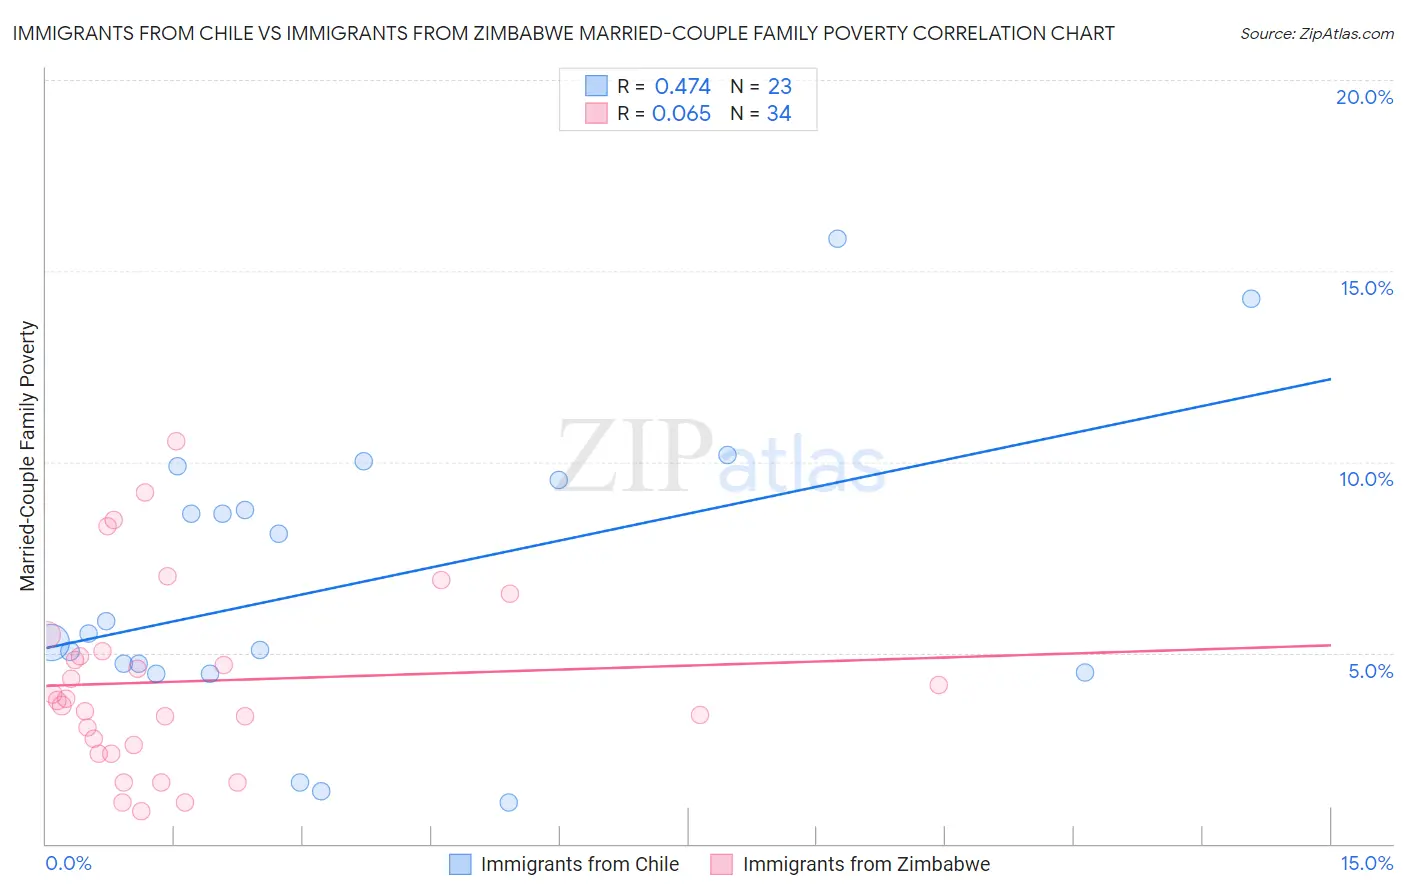 Immigrants from Chile vs Immigrants from Zimbabwe Married-Couple Family Poverty